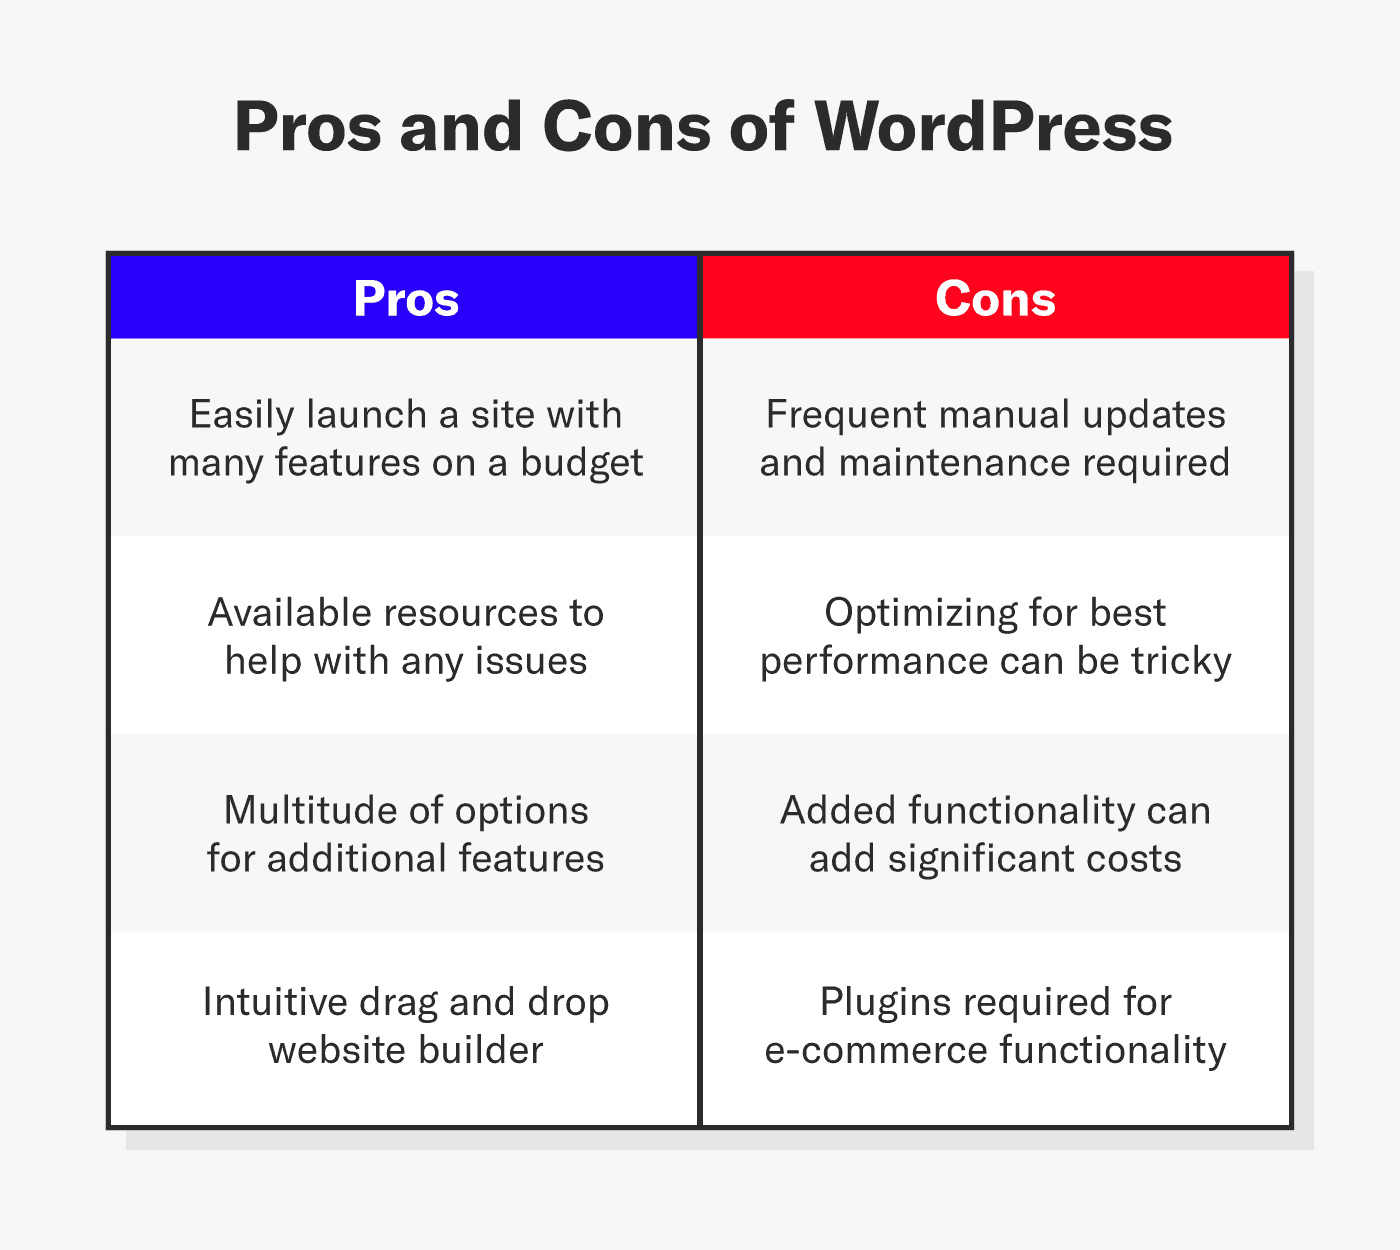 Pros and cons of WordPress